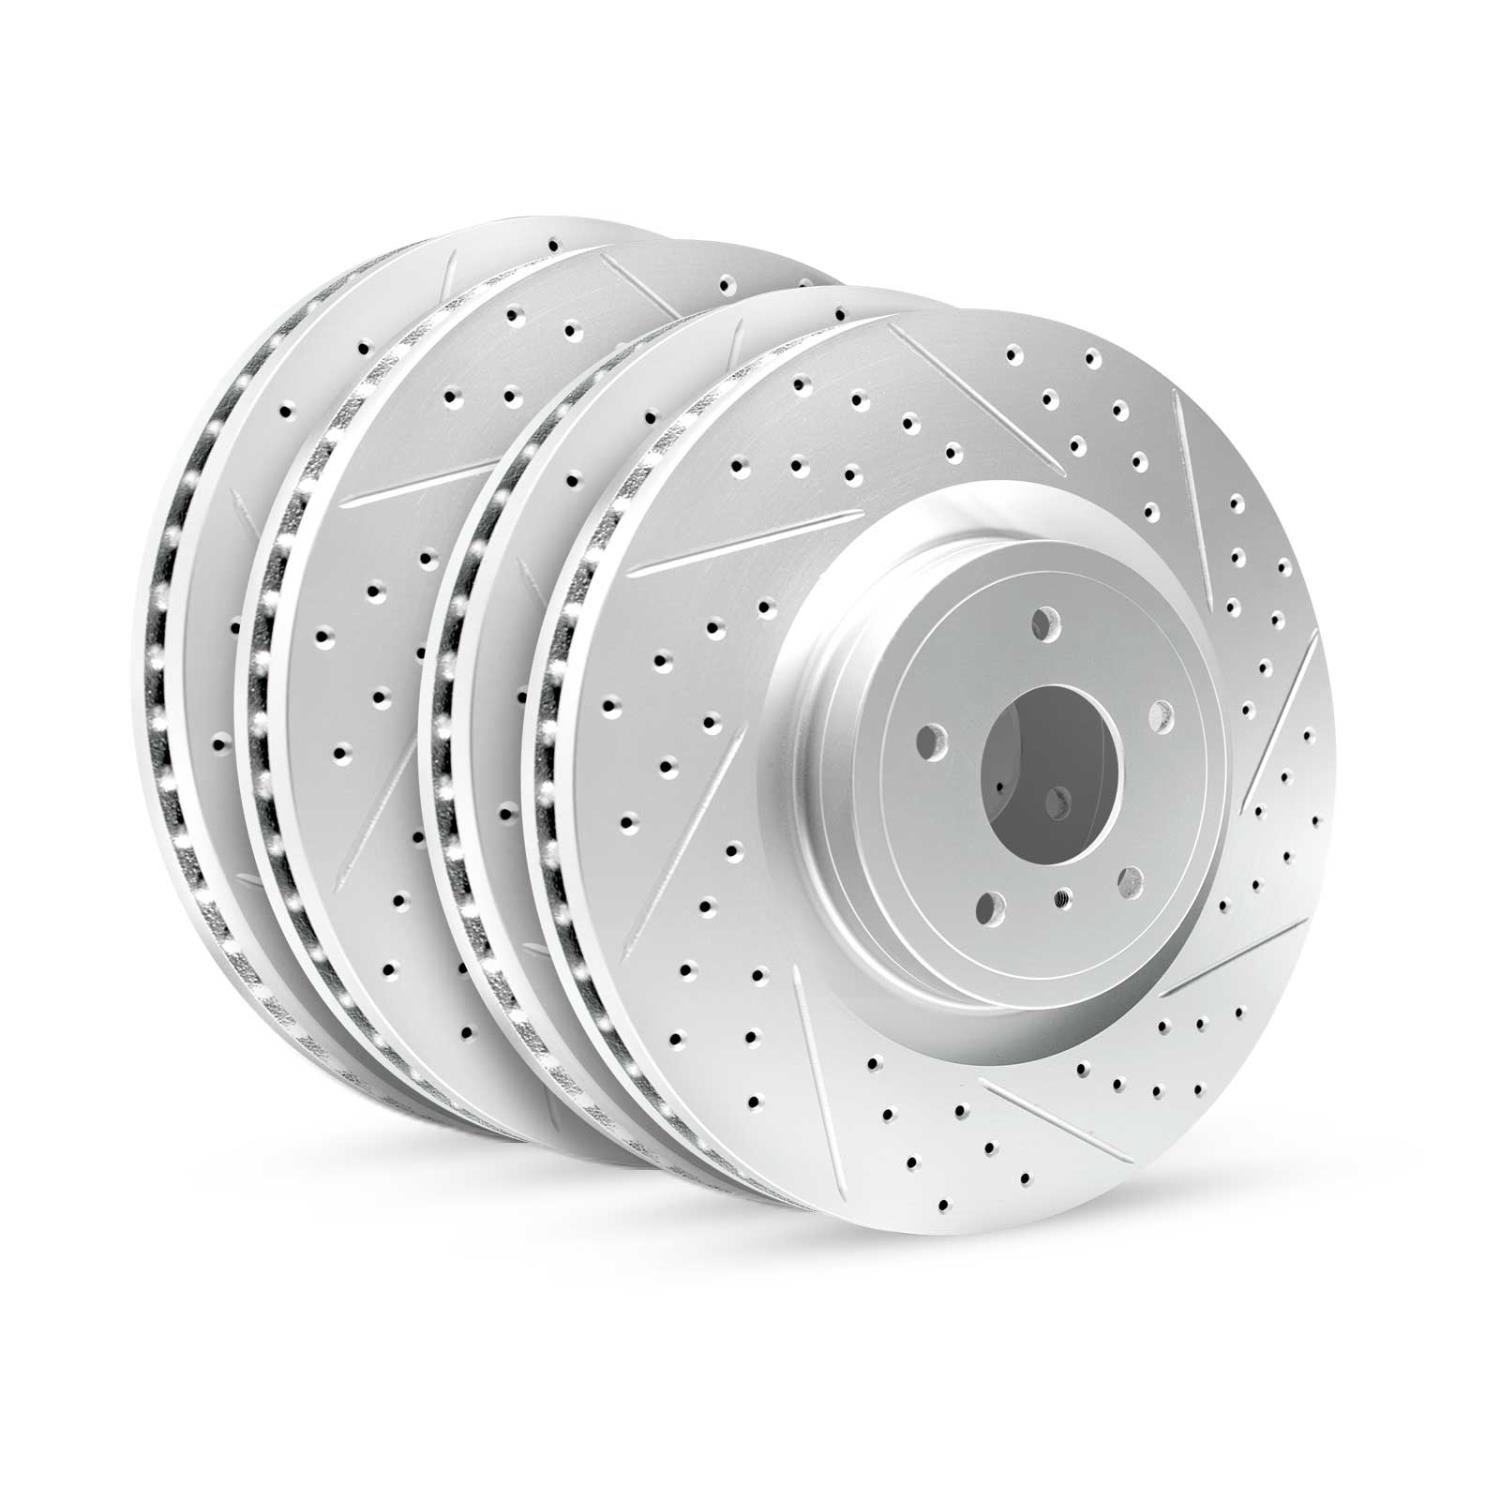 GEO-Carbon Drilled/Slotted Rotors, 2001-2011 Fits Multiple Makes/Models, Position: Front/Rear